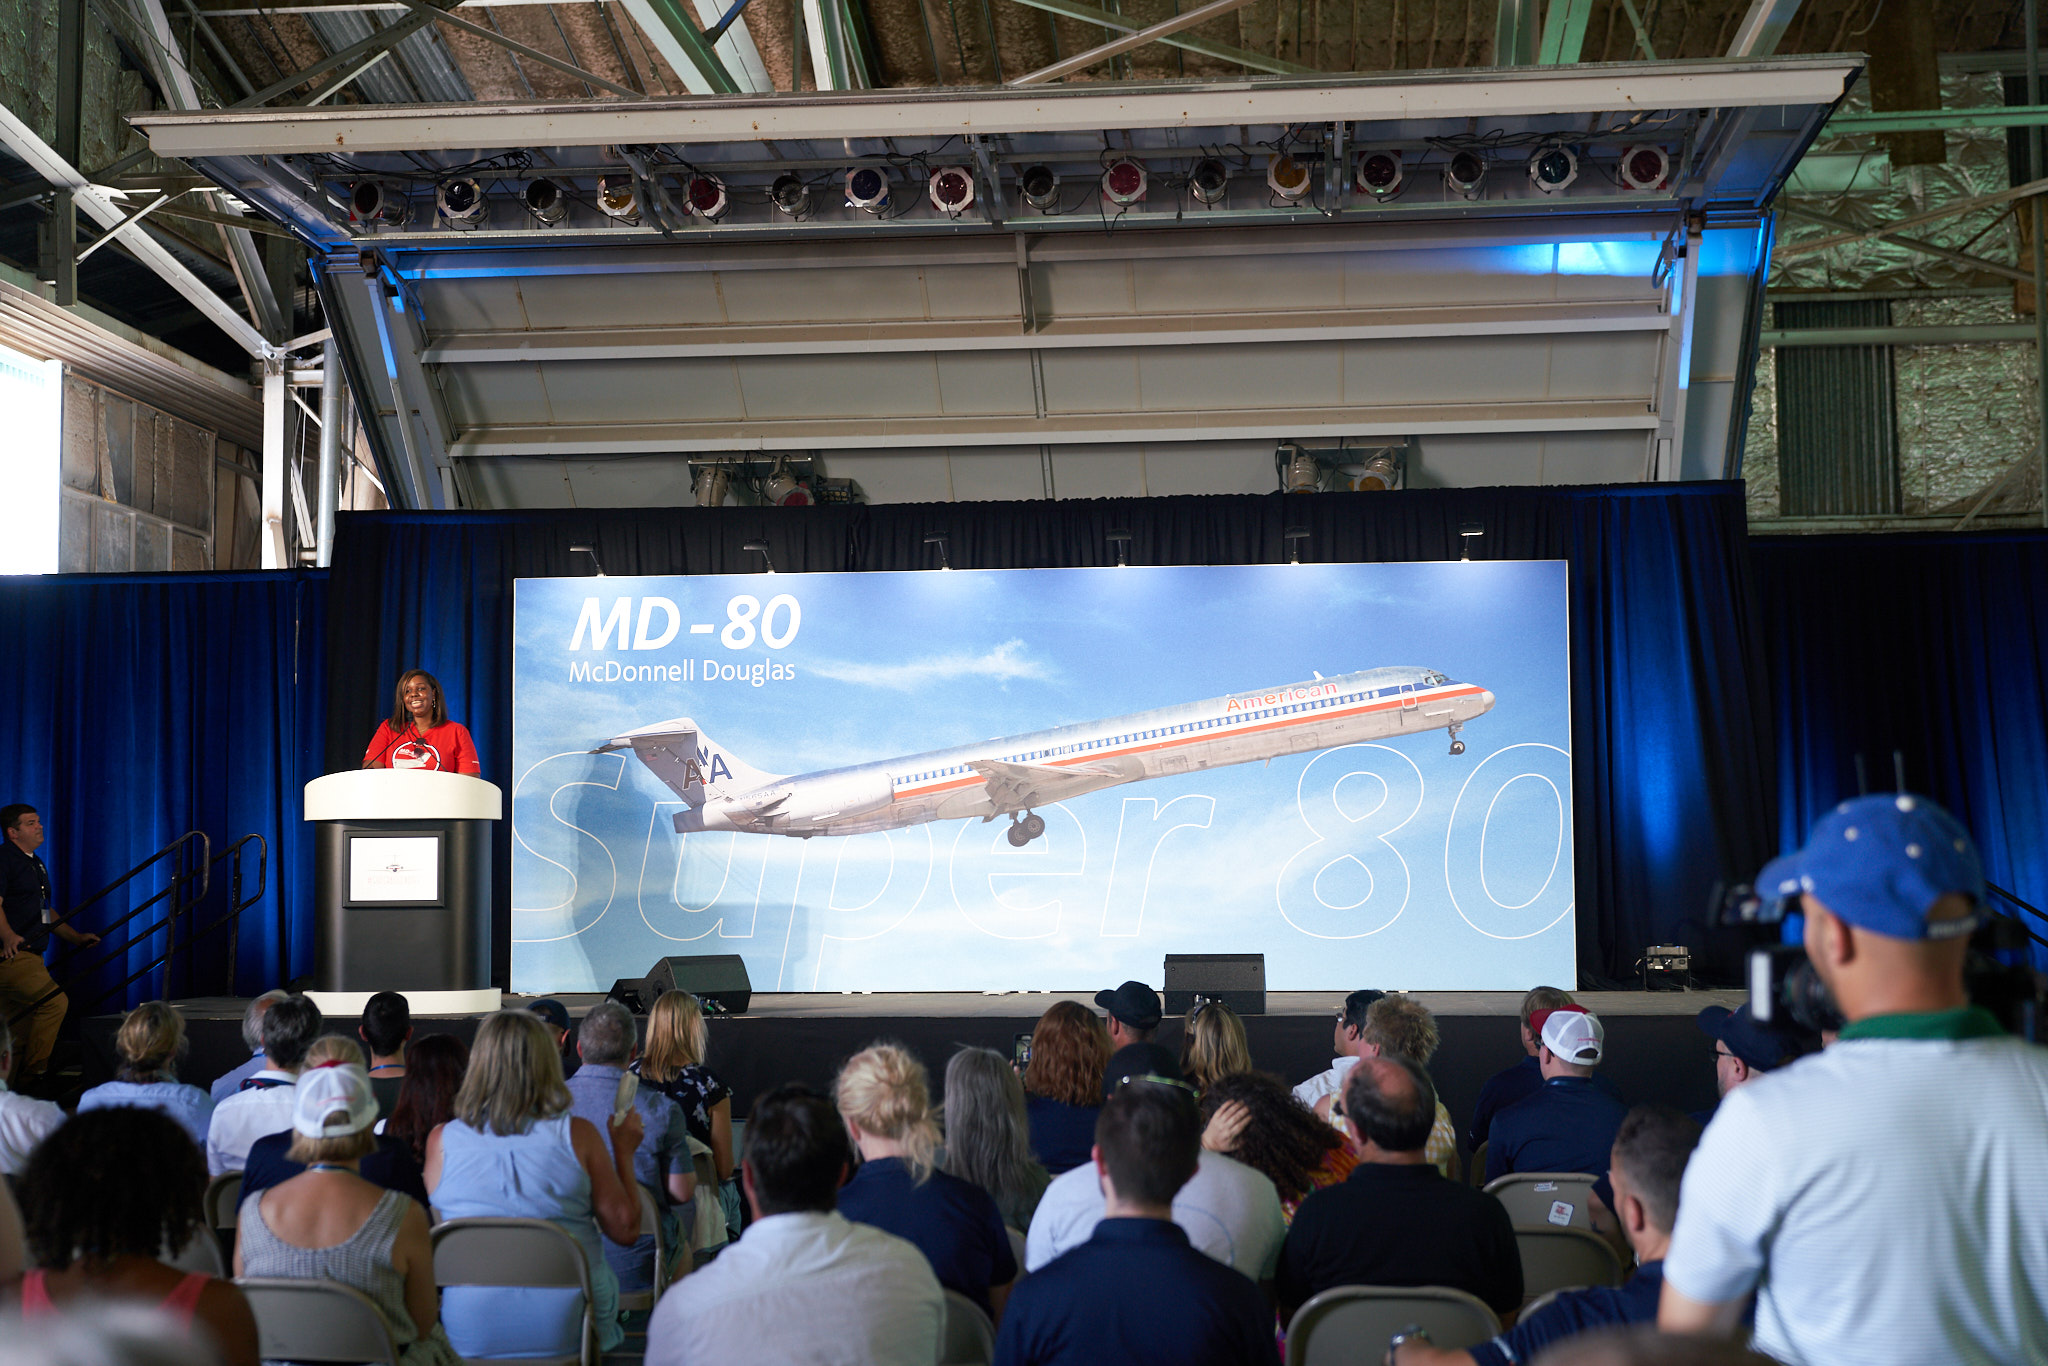 a woman standing at a podium in front of a large screen with a large airplane on it